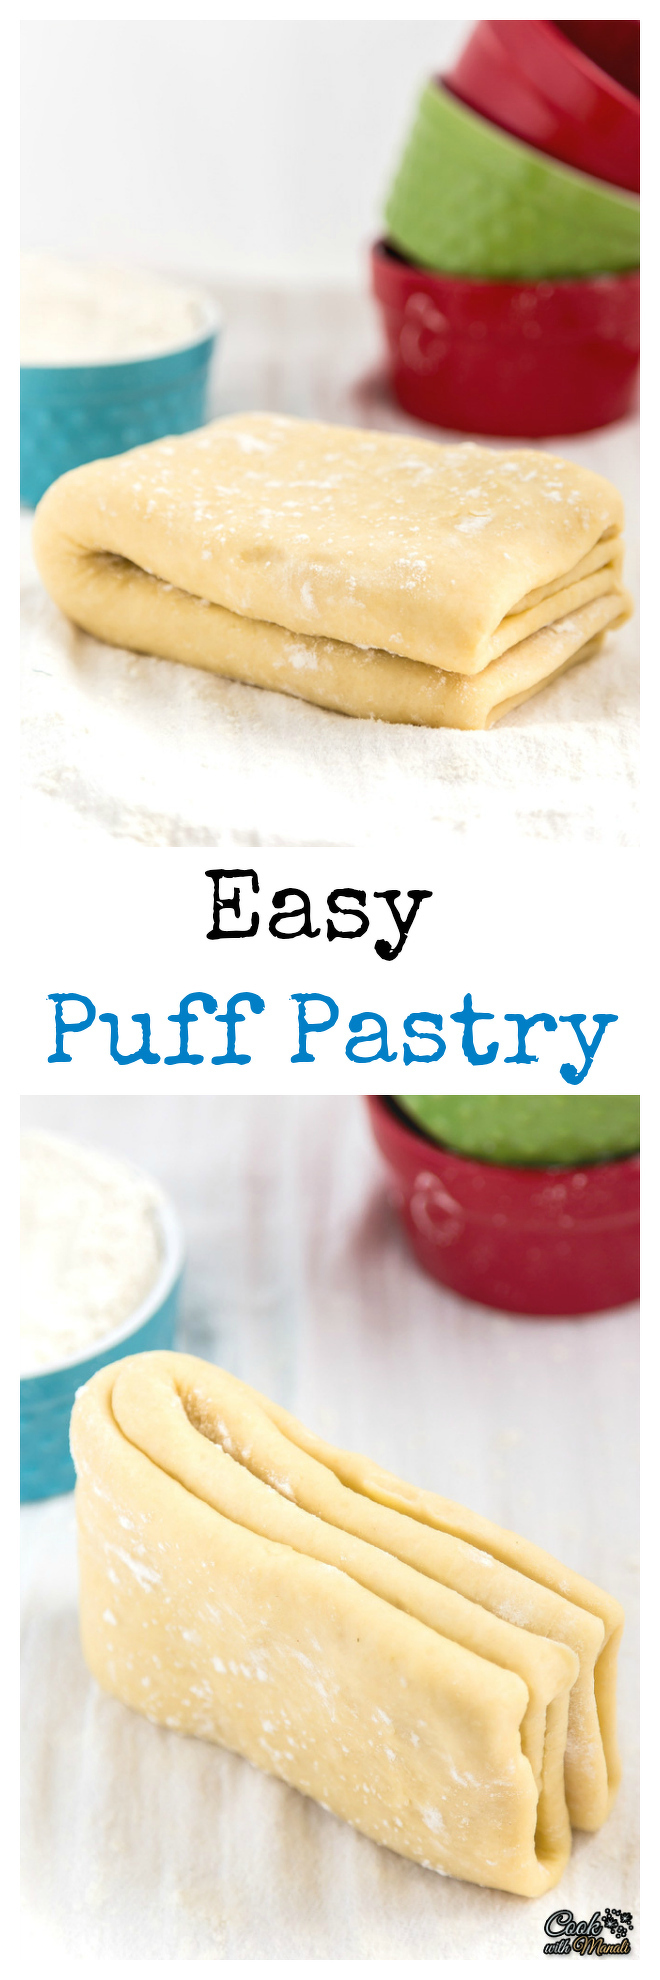 Easy Puff Pastry Collage-nocwm